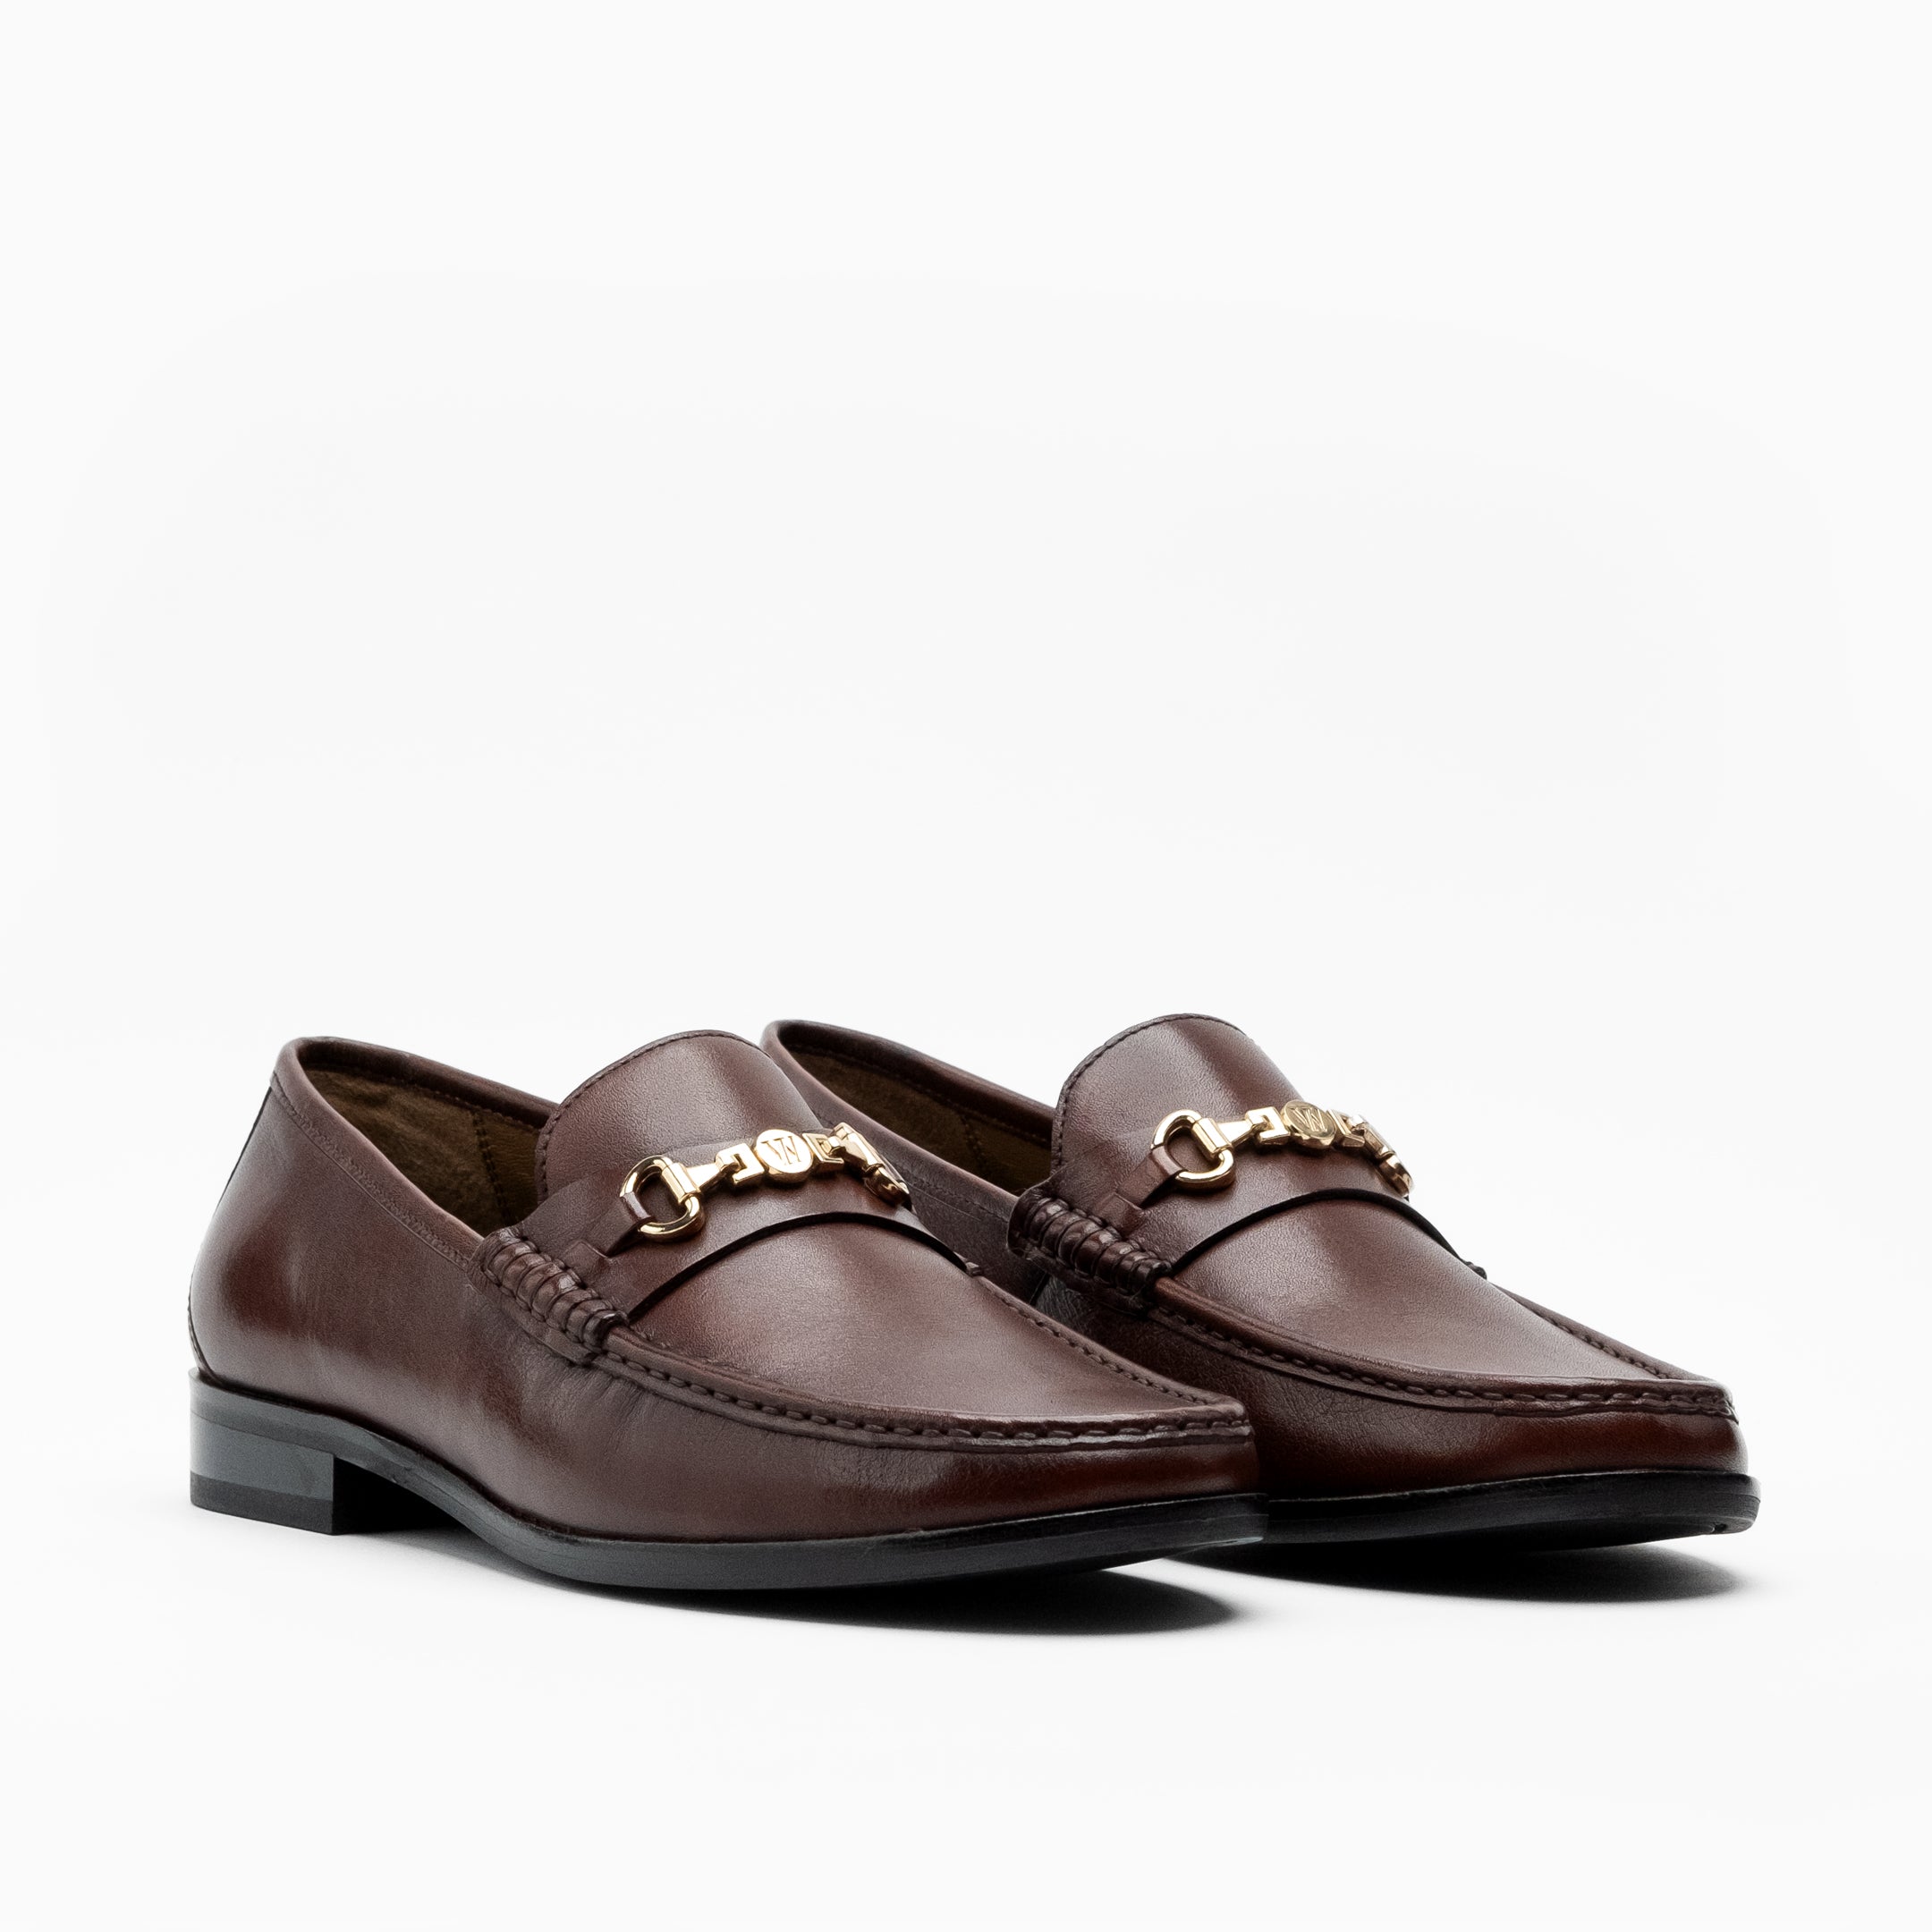 Walk London Mens - Tino Trim Loafer - Brown Leather